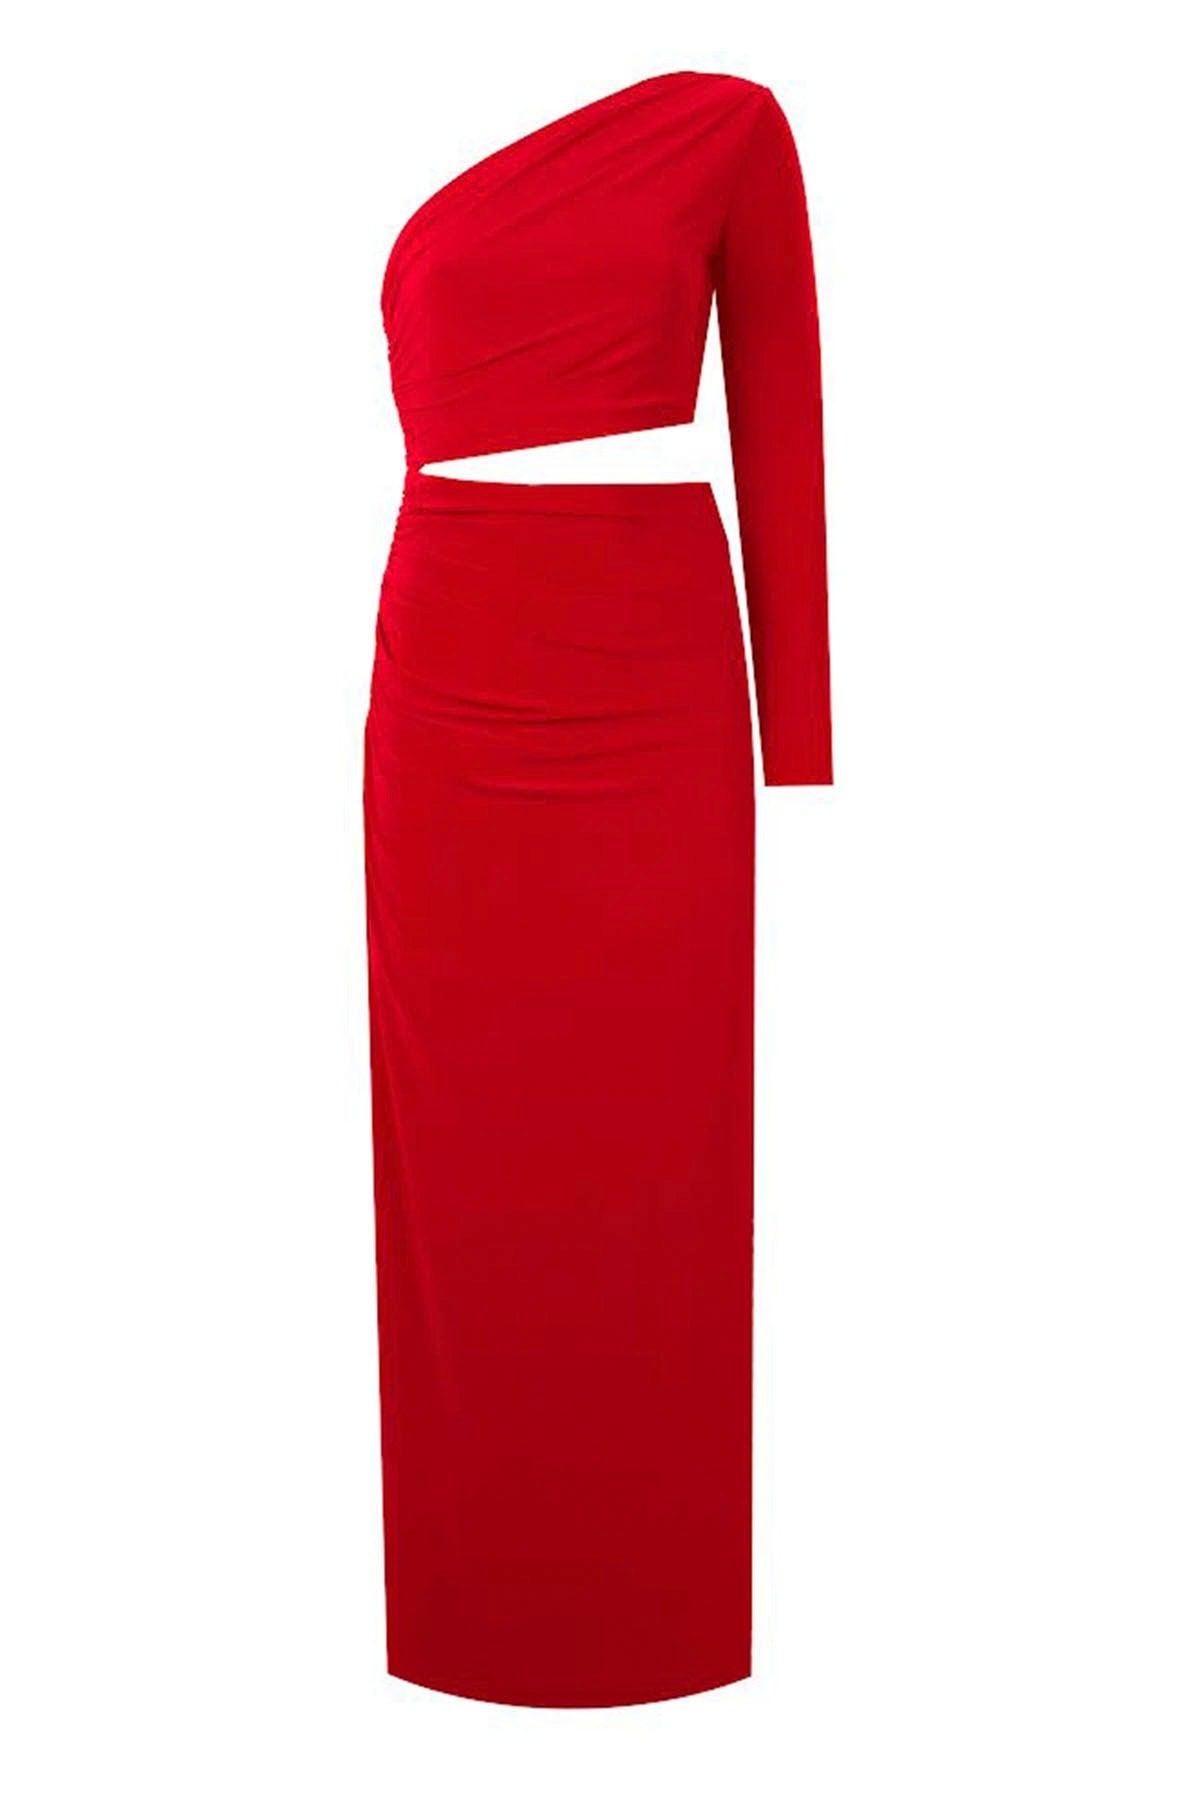 Red Single Sleeve Side Draped Long Evening Dress with Belly Window - Swordslife